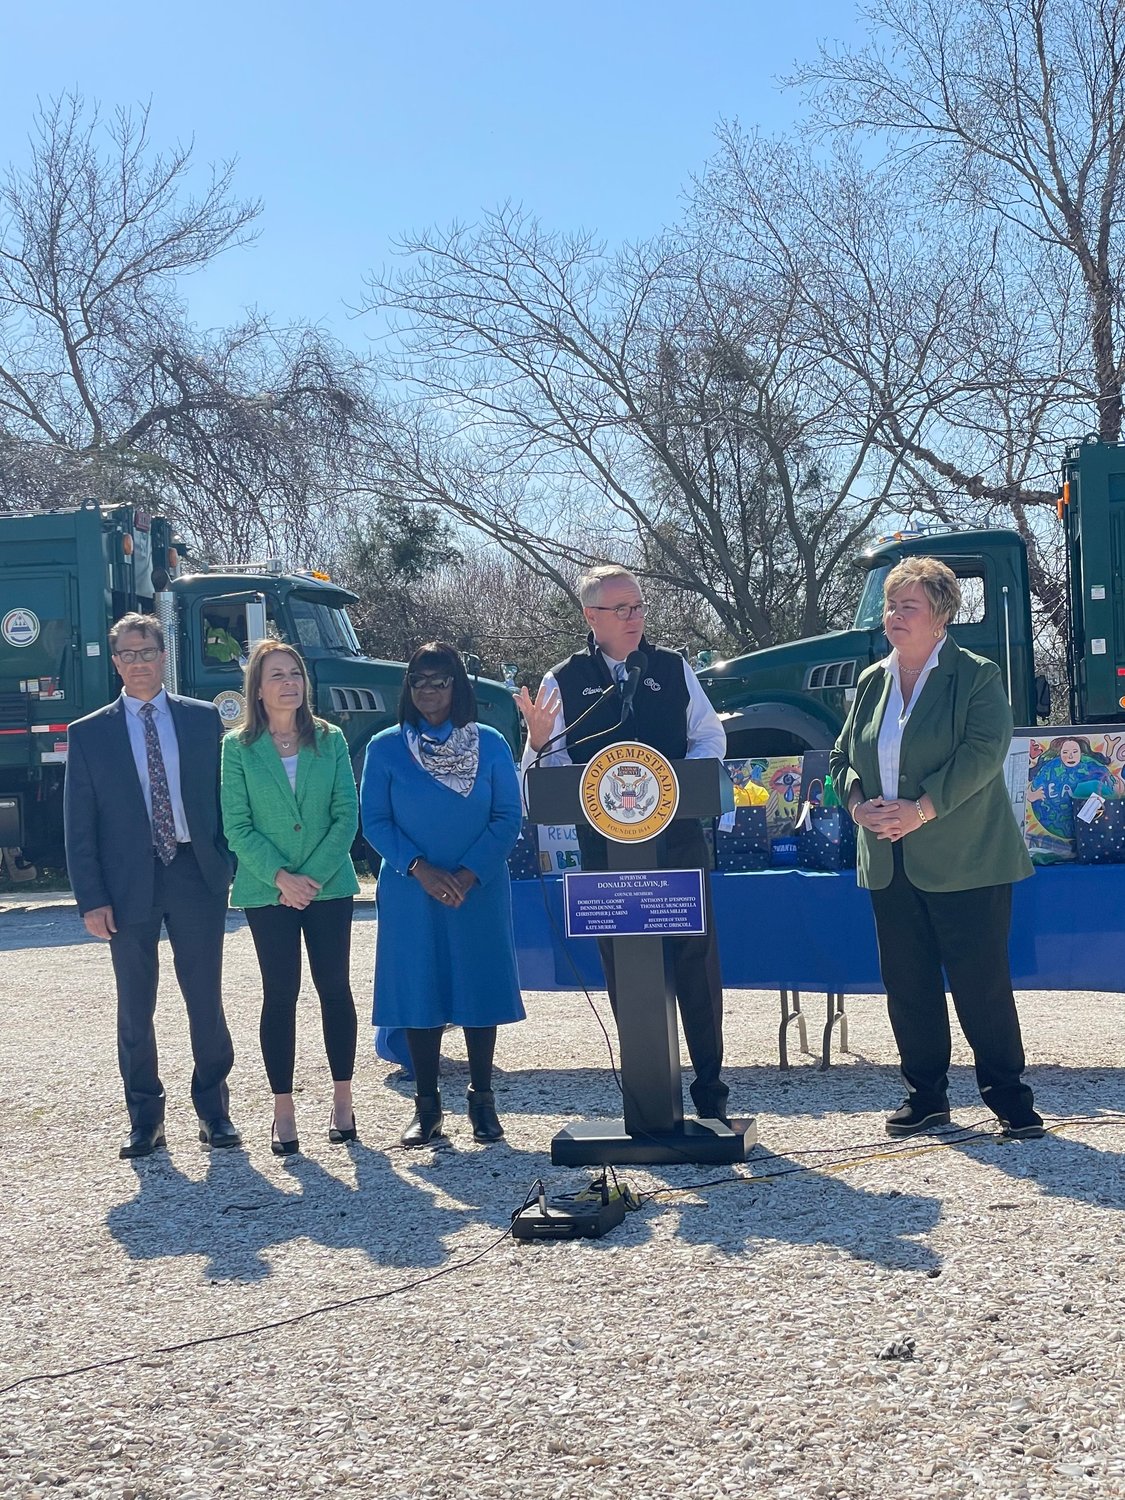 At the ceremony, Town Supervisor Don Clavin spoke about the importance of recycling.